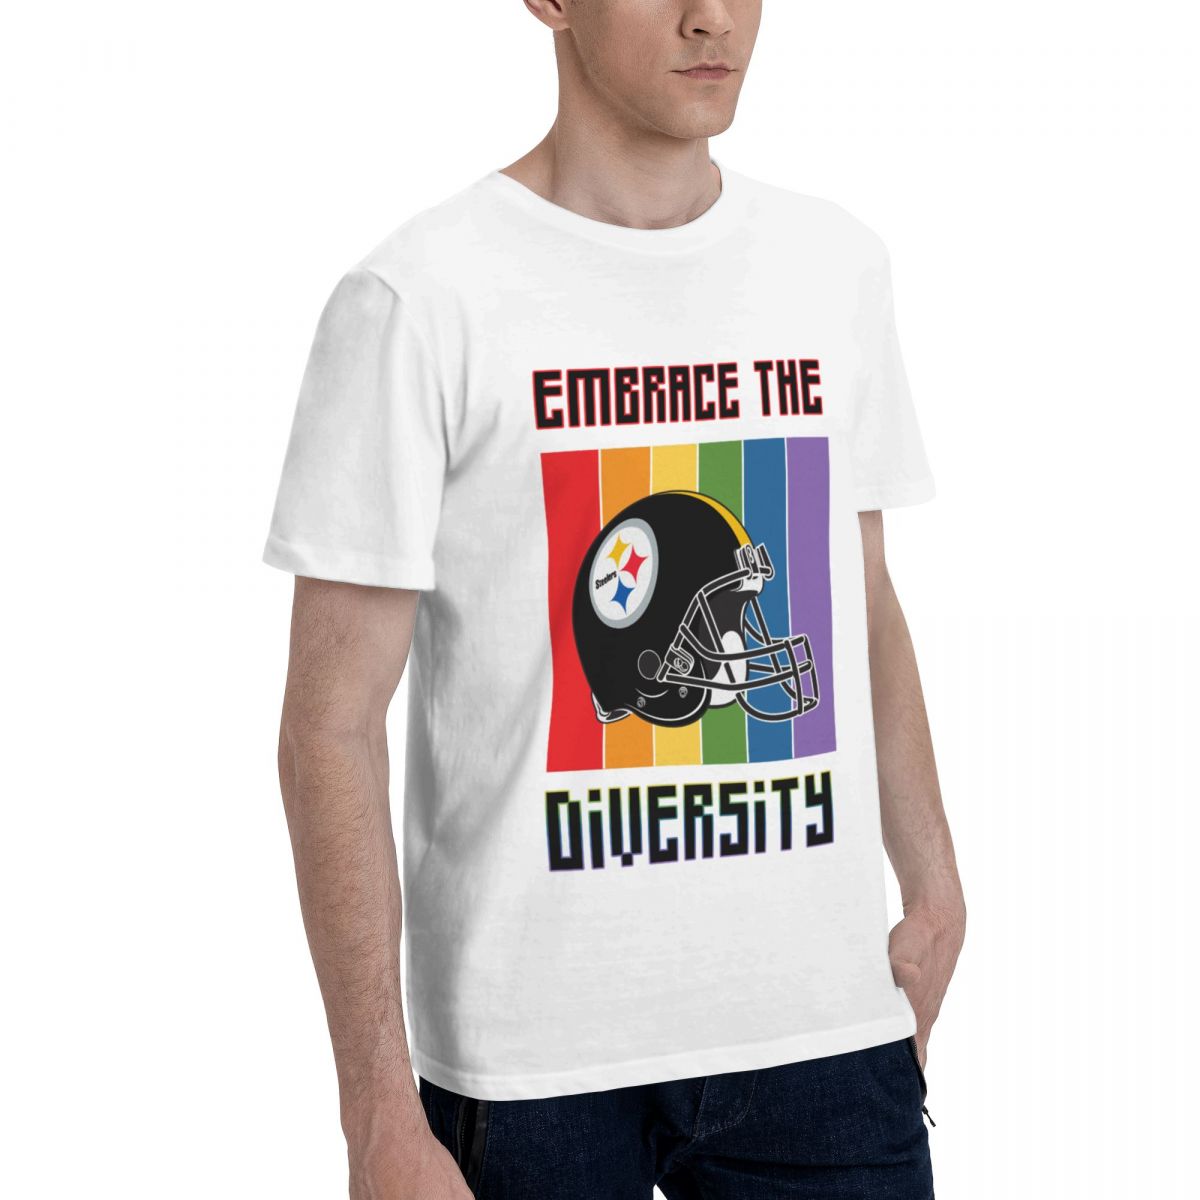 Pittsburgh Steelers Embrace The Diversity Cotton T-Shirt Men's